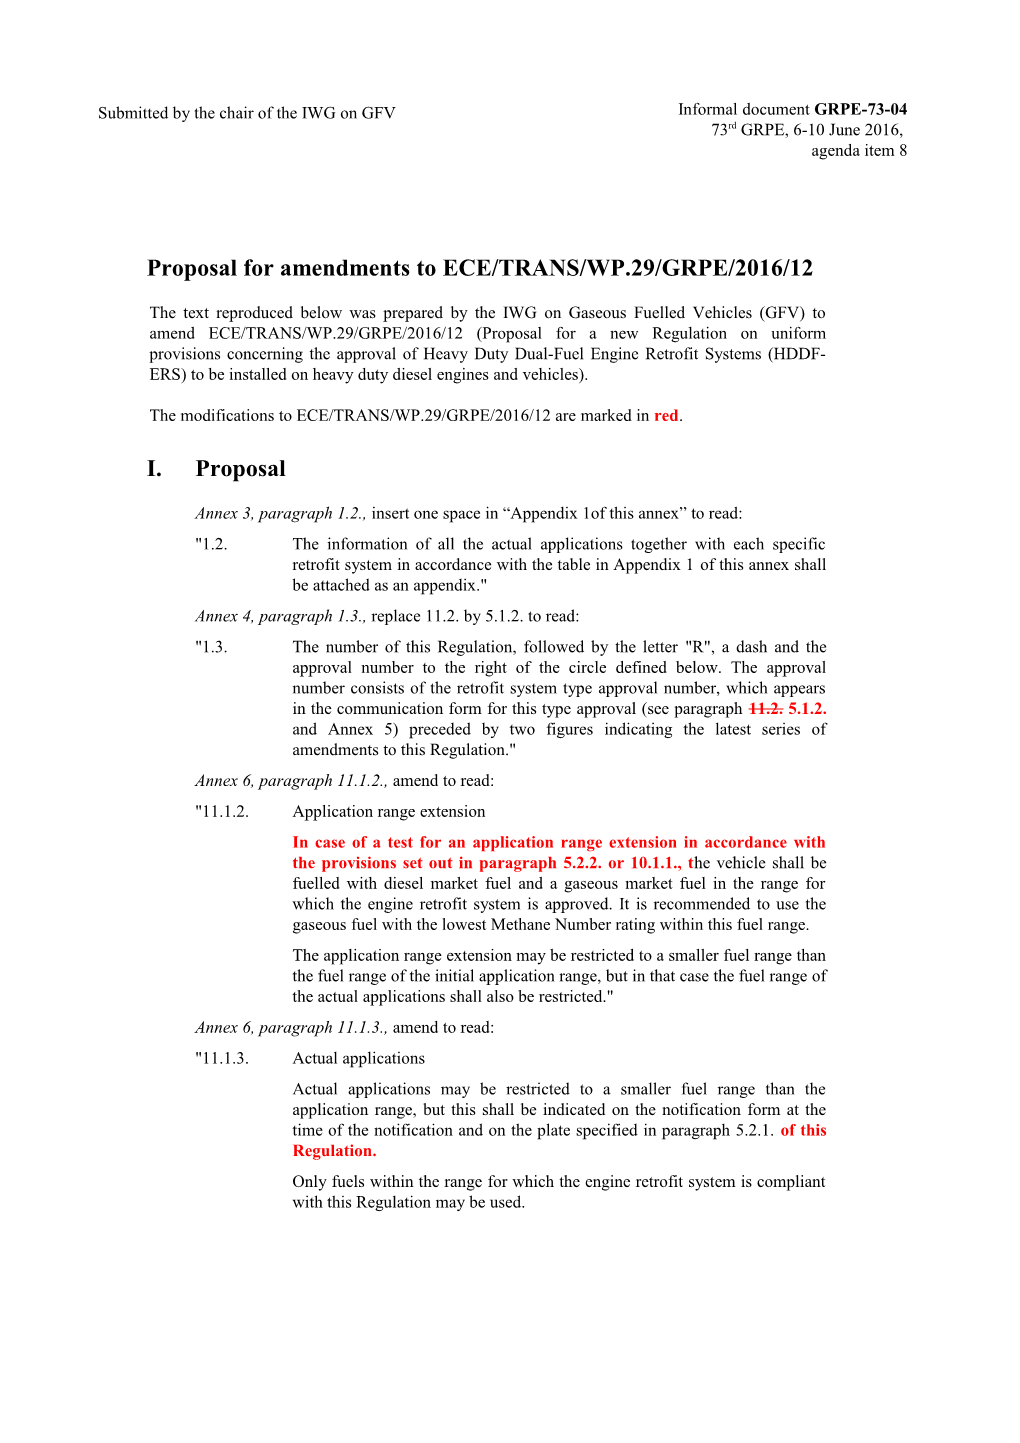 Proposal for Amendments to the 06 and 07 Series of Amendments to Regulation No